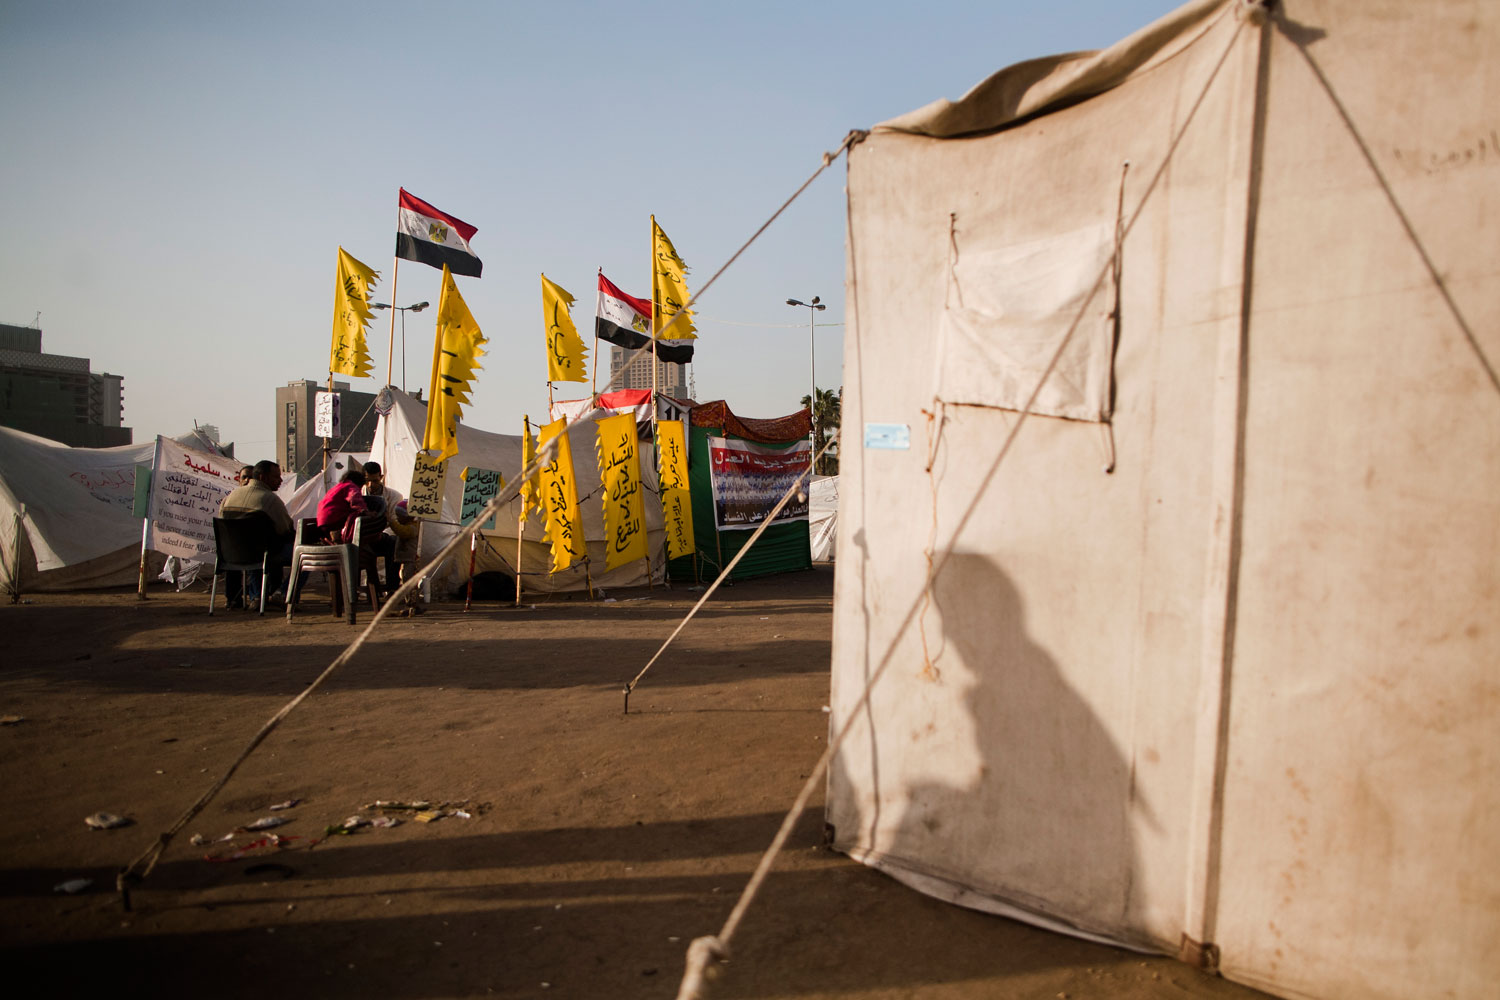 The shadow of a man can be seen on a tent as others meet in the background. The tent city of Tahrir has decreased in size over the past month.